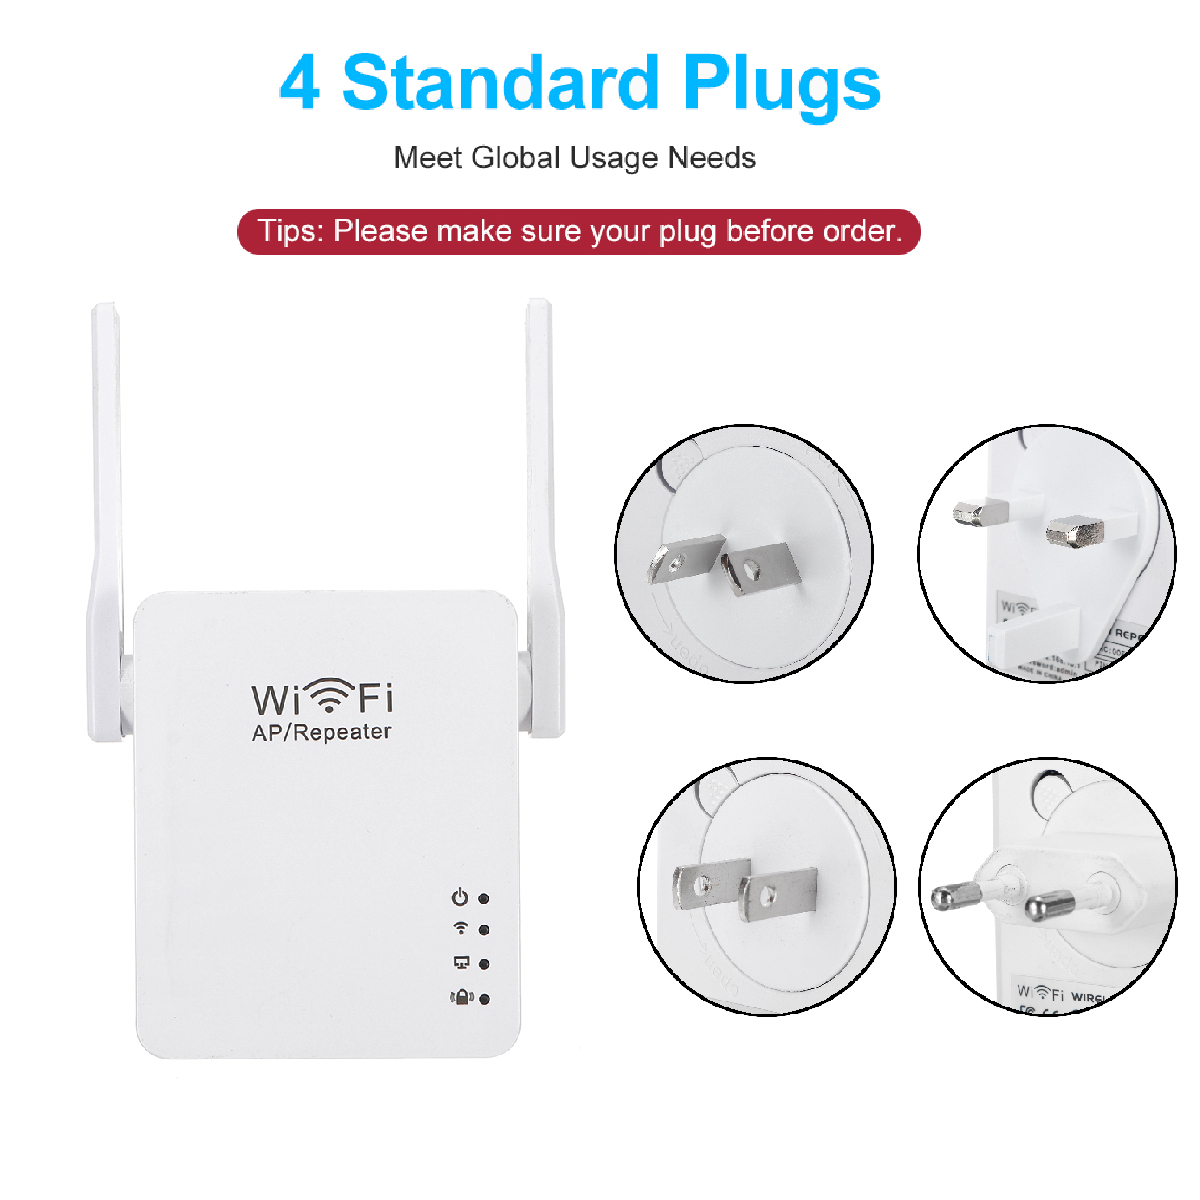 300Mbps-80211n-Wireless-Wifi-Extender-Repeater-24G-AP-Router-Dual-Antenna-Signal-Booster-Extender-Am-1529338-8